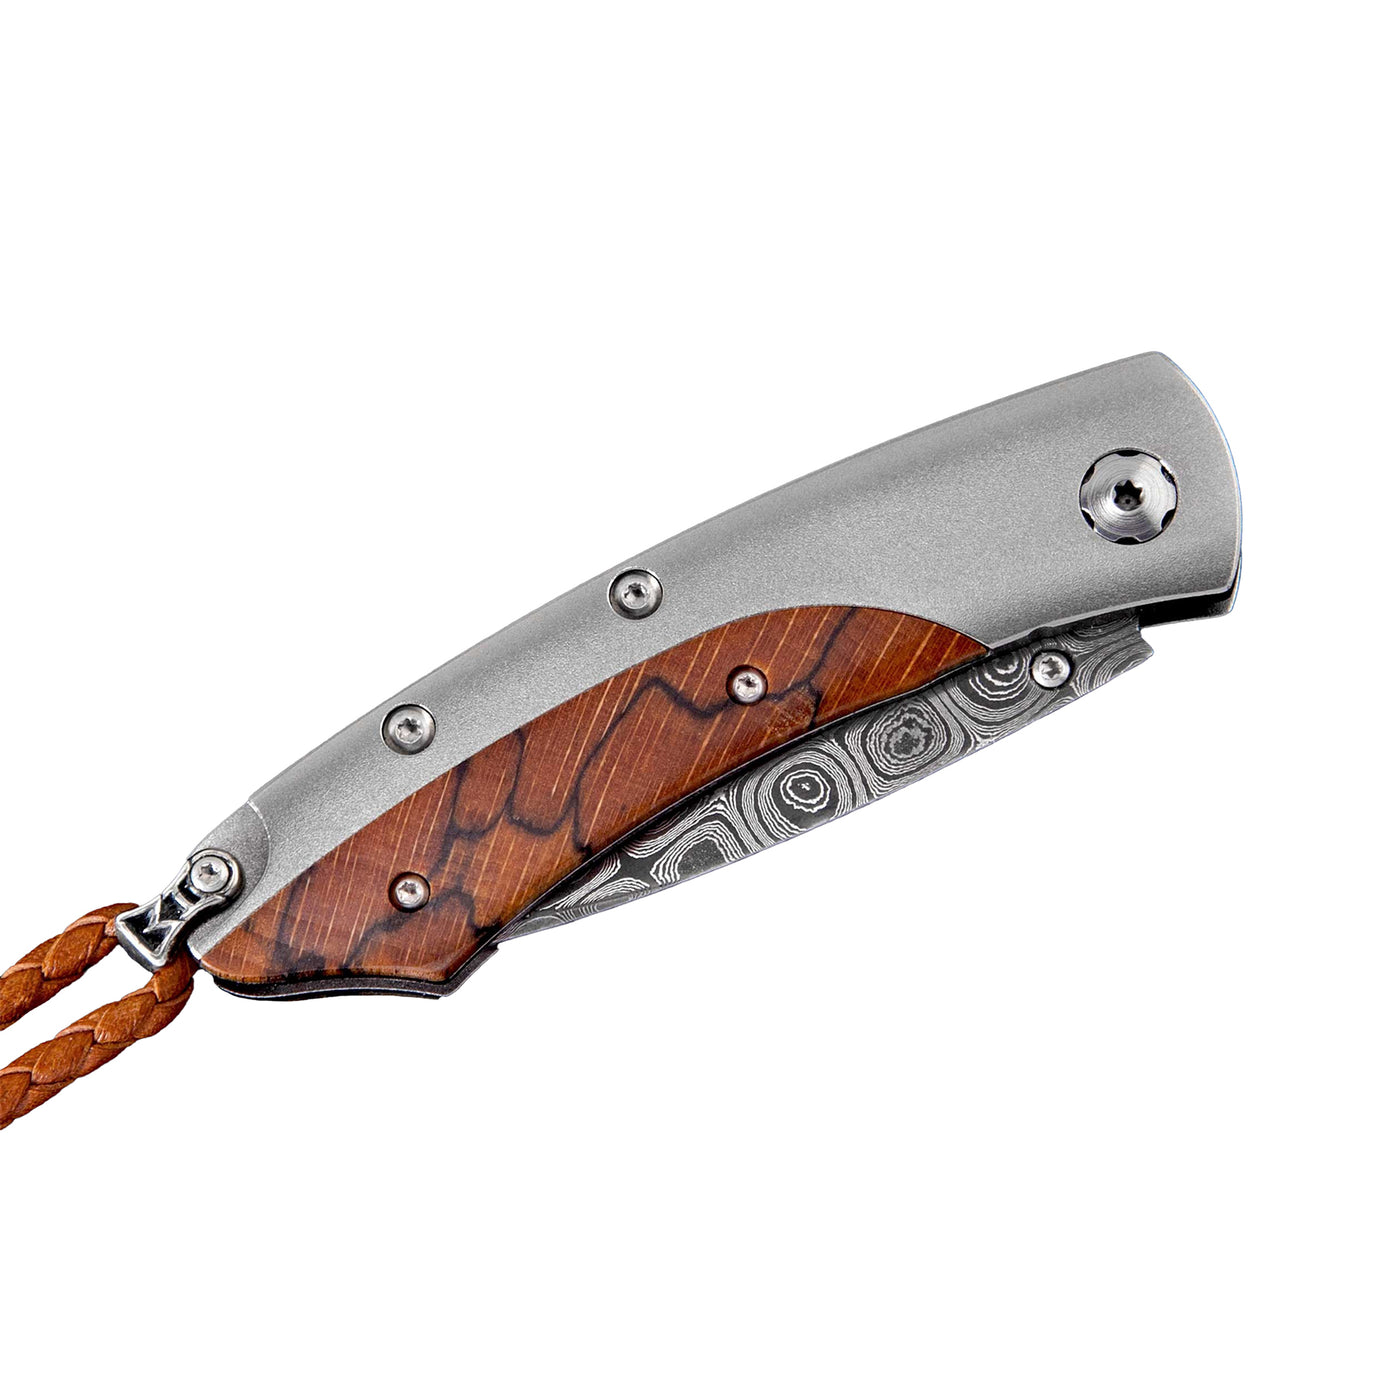 B04 Summer Rain Folding Knife | 'Raindrop' Damascus hand-forged by Mike Norris